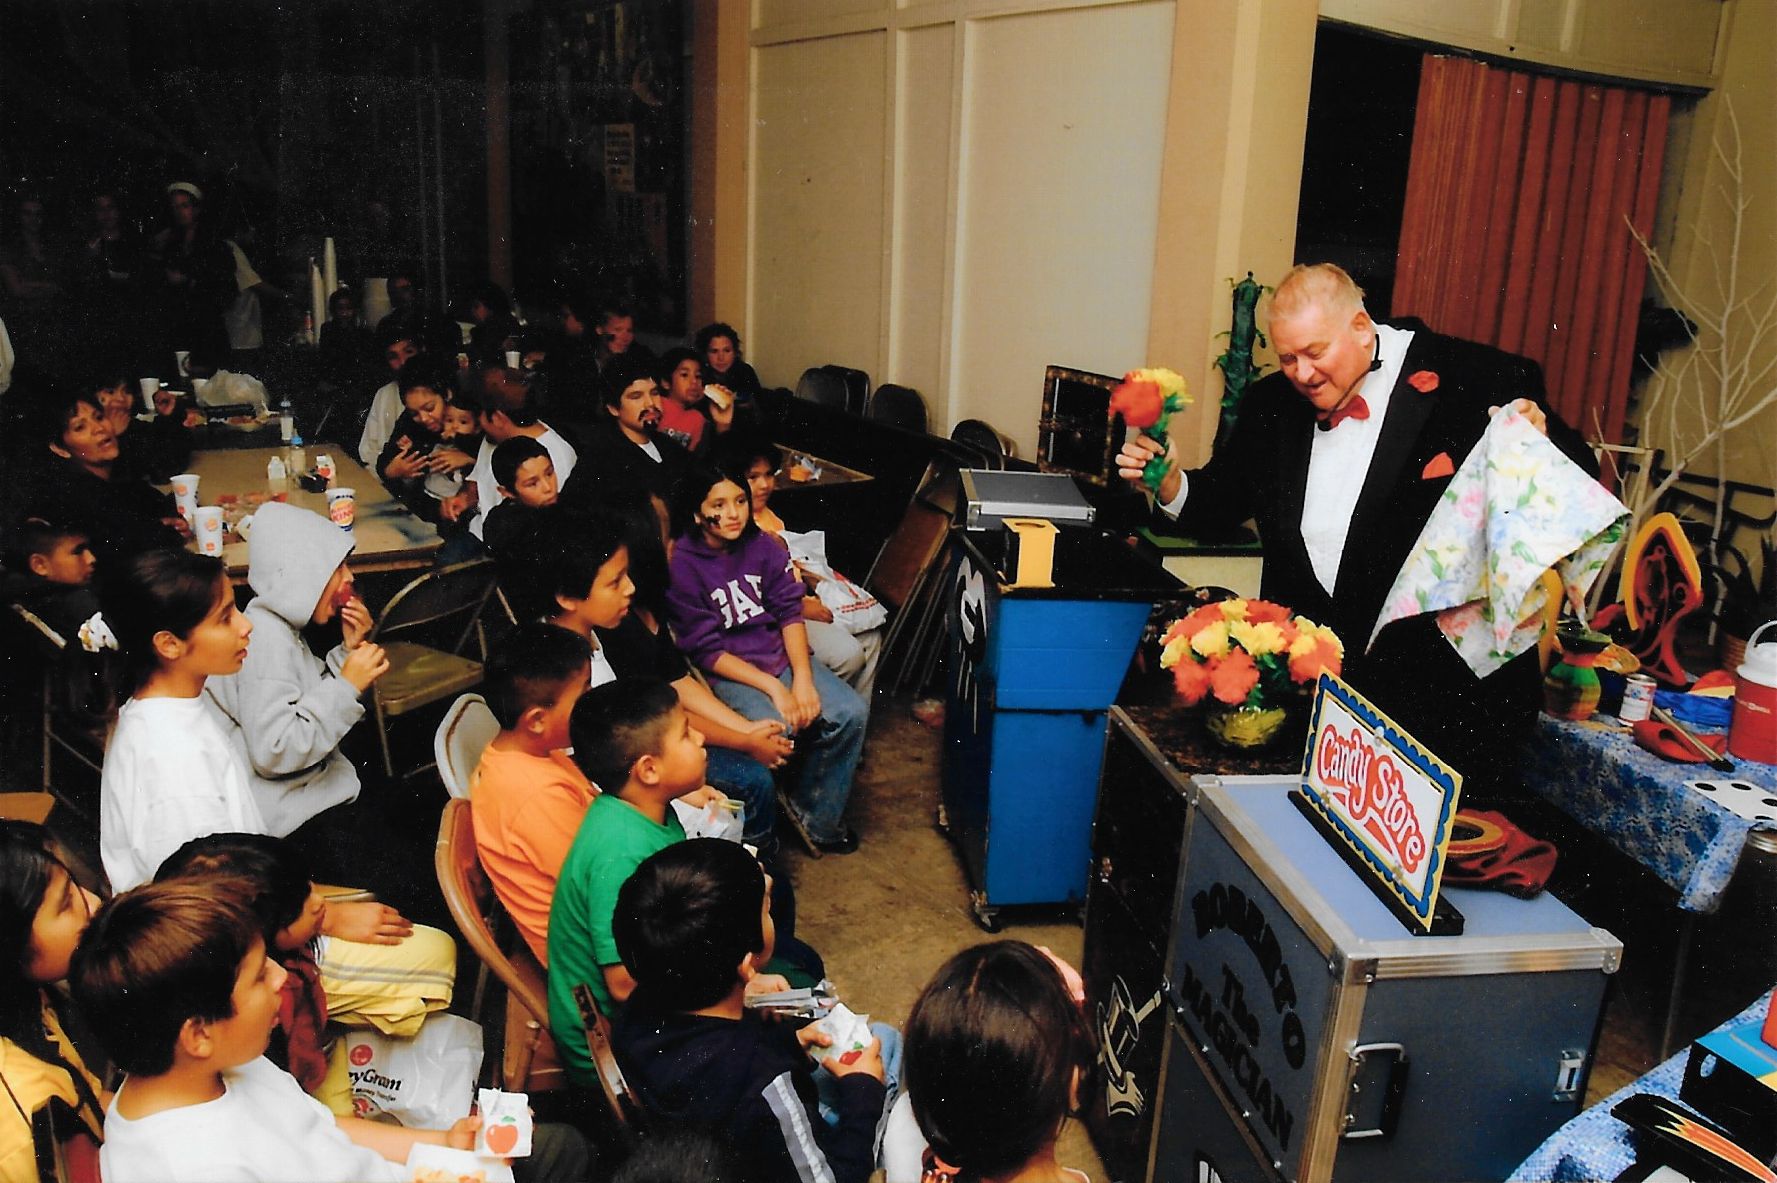 Hire a Magician Entertainer for a Kid’s Birthday Party!